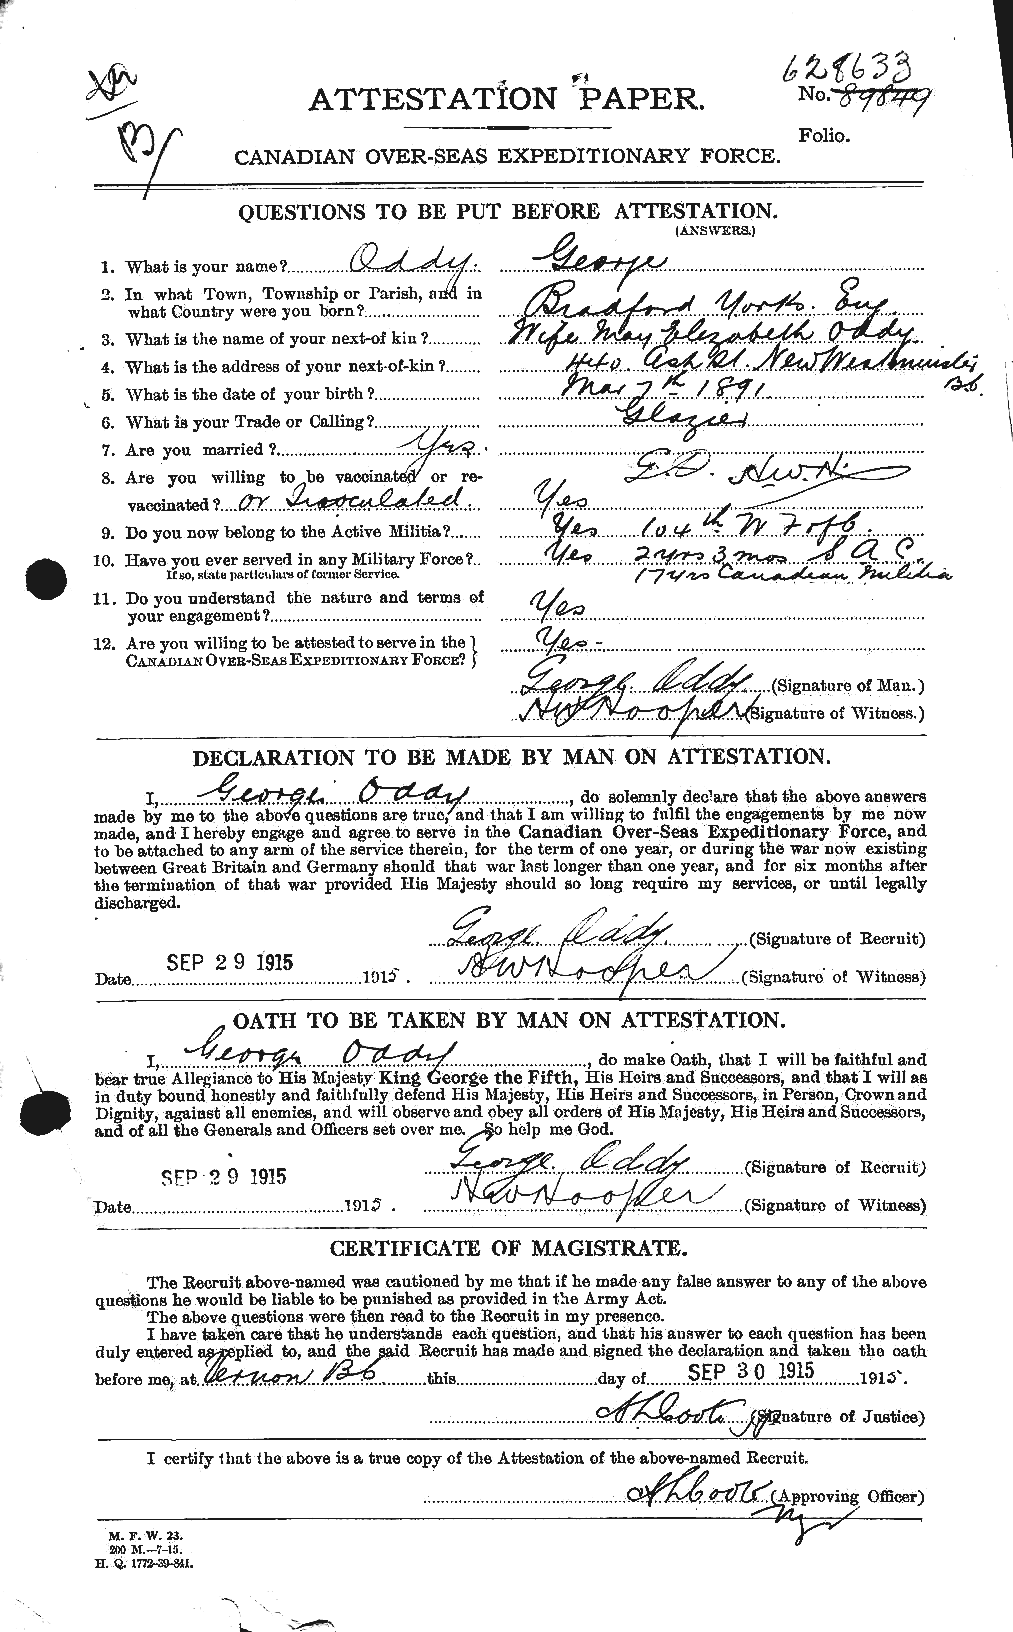 Personnel Records of the First World War - CEF 552940a